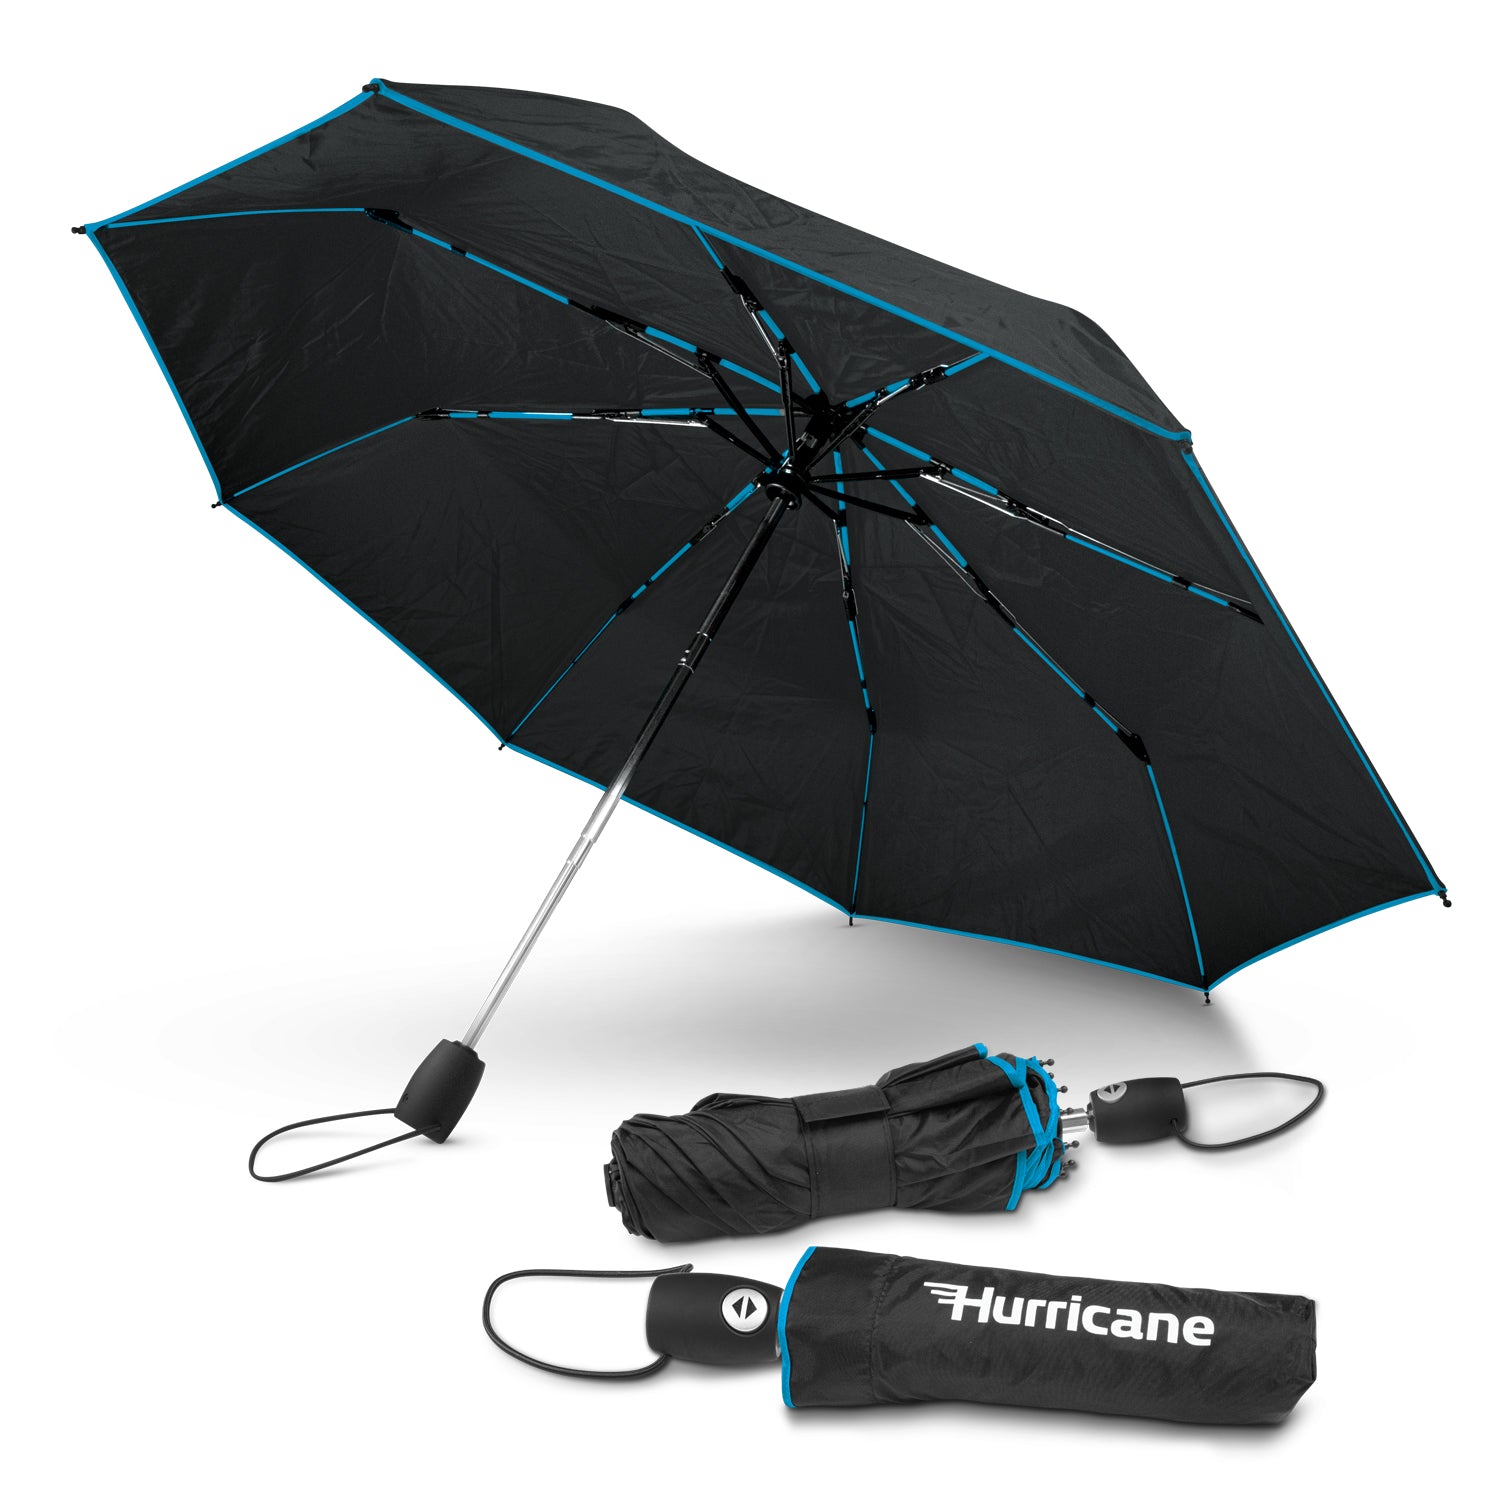 HURRICANE COMPACT®️ Heavy Duty Wind-Rated Compact Umbrella With Double Layer Wind/Vent System, Fibreglass Ribs & Steel Frame, Smart Auto Open & Close